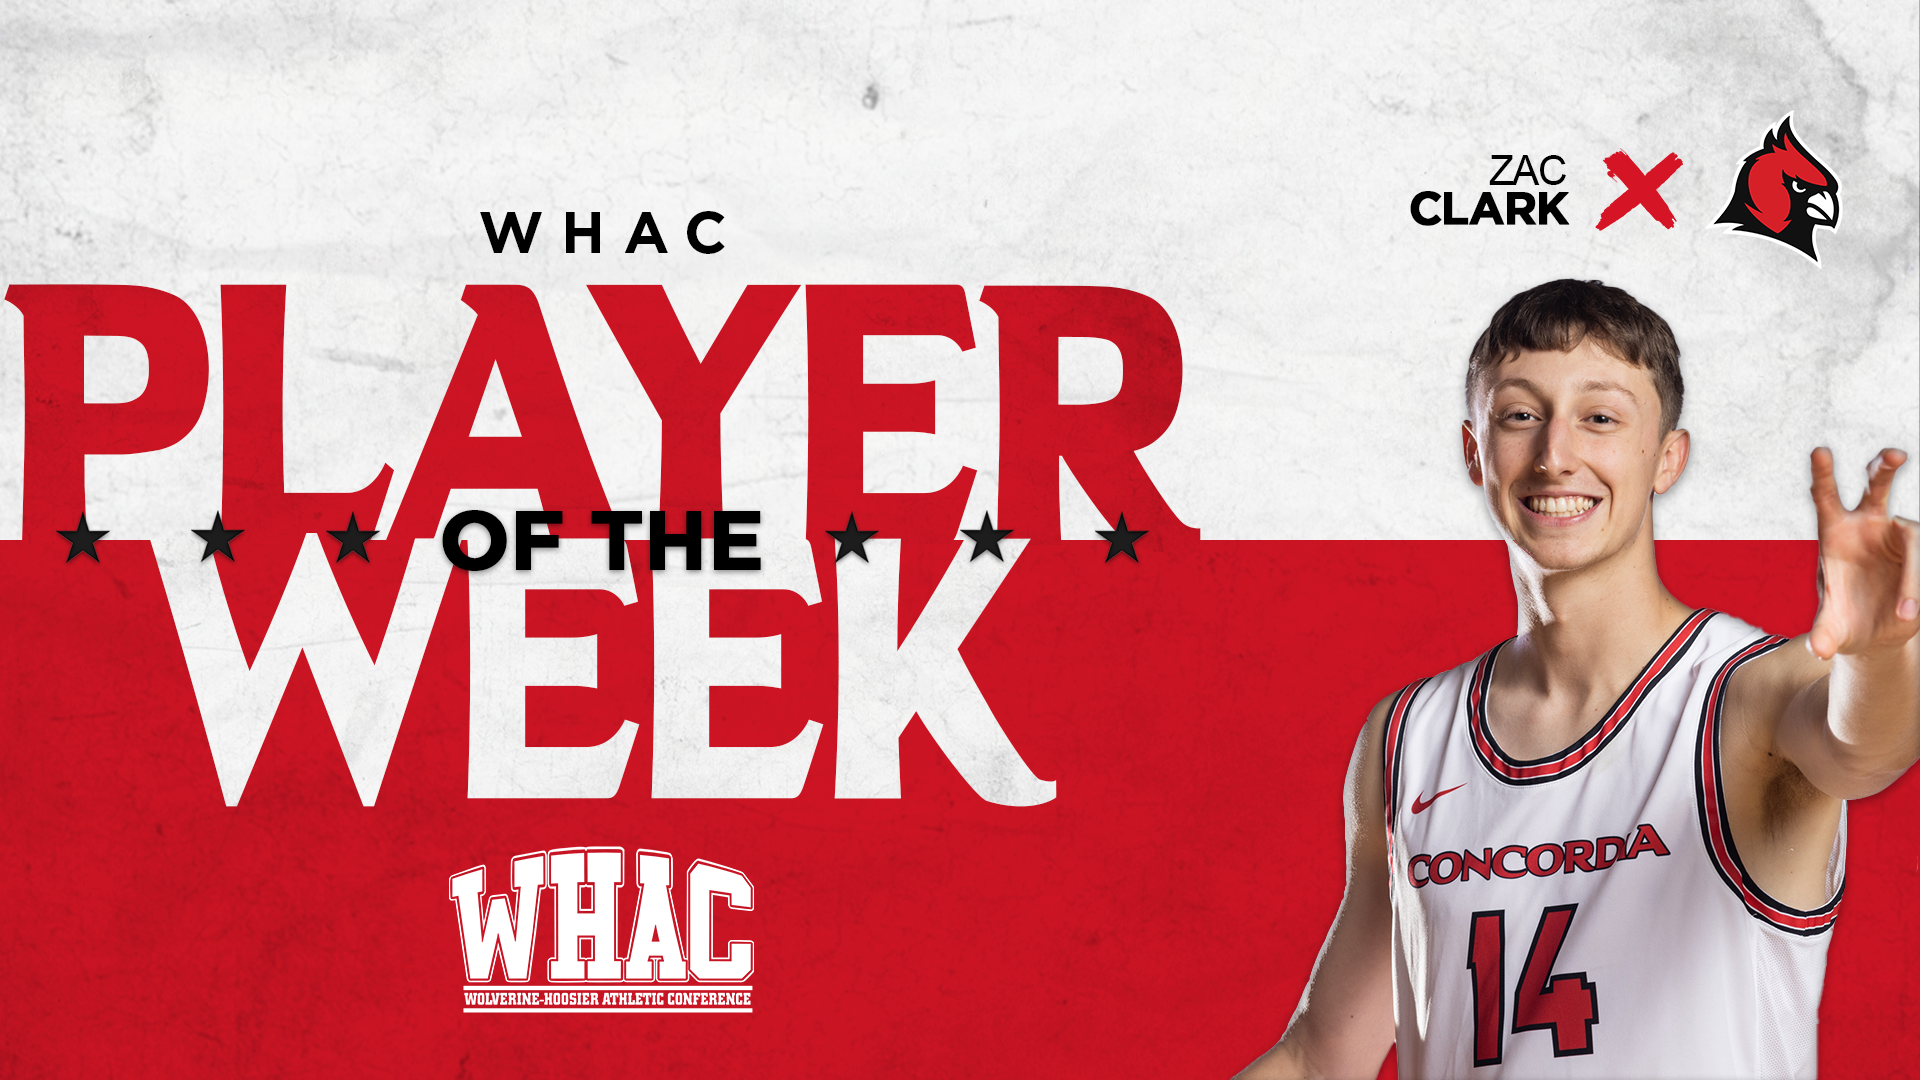 Men's Basketball's Clark wins his first WHAC Player of the Week award